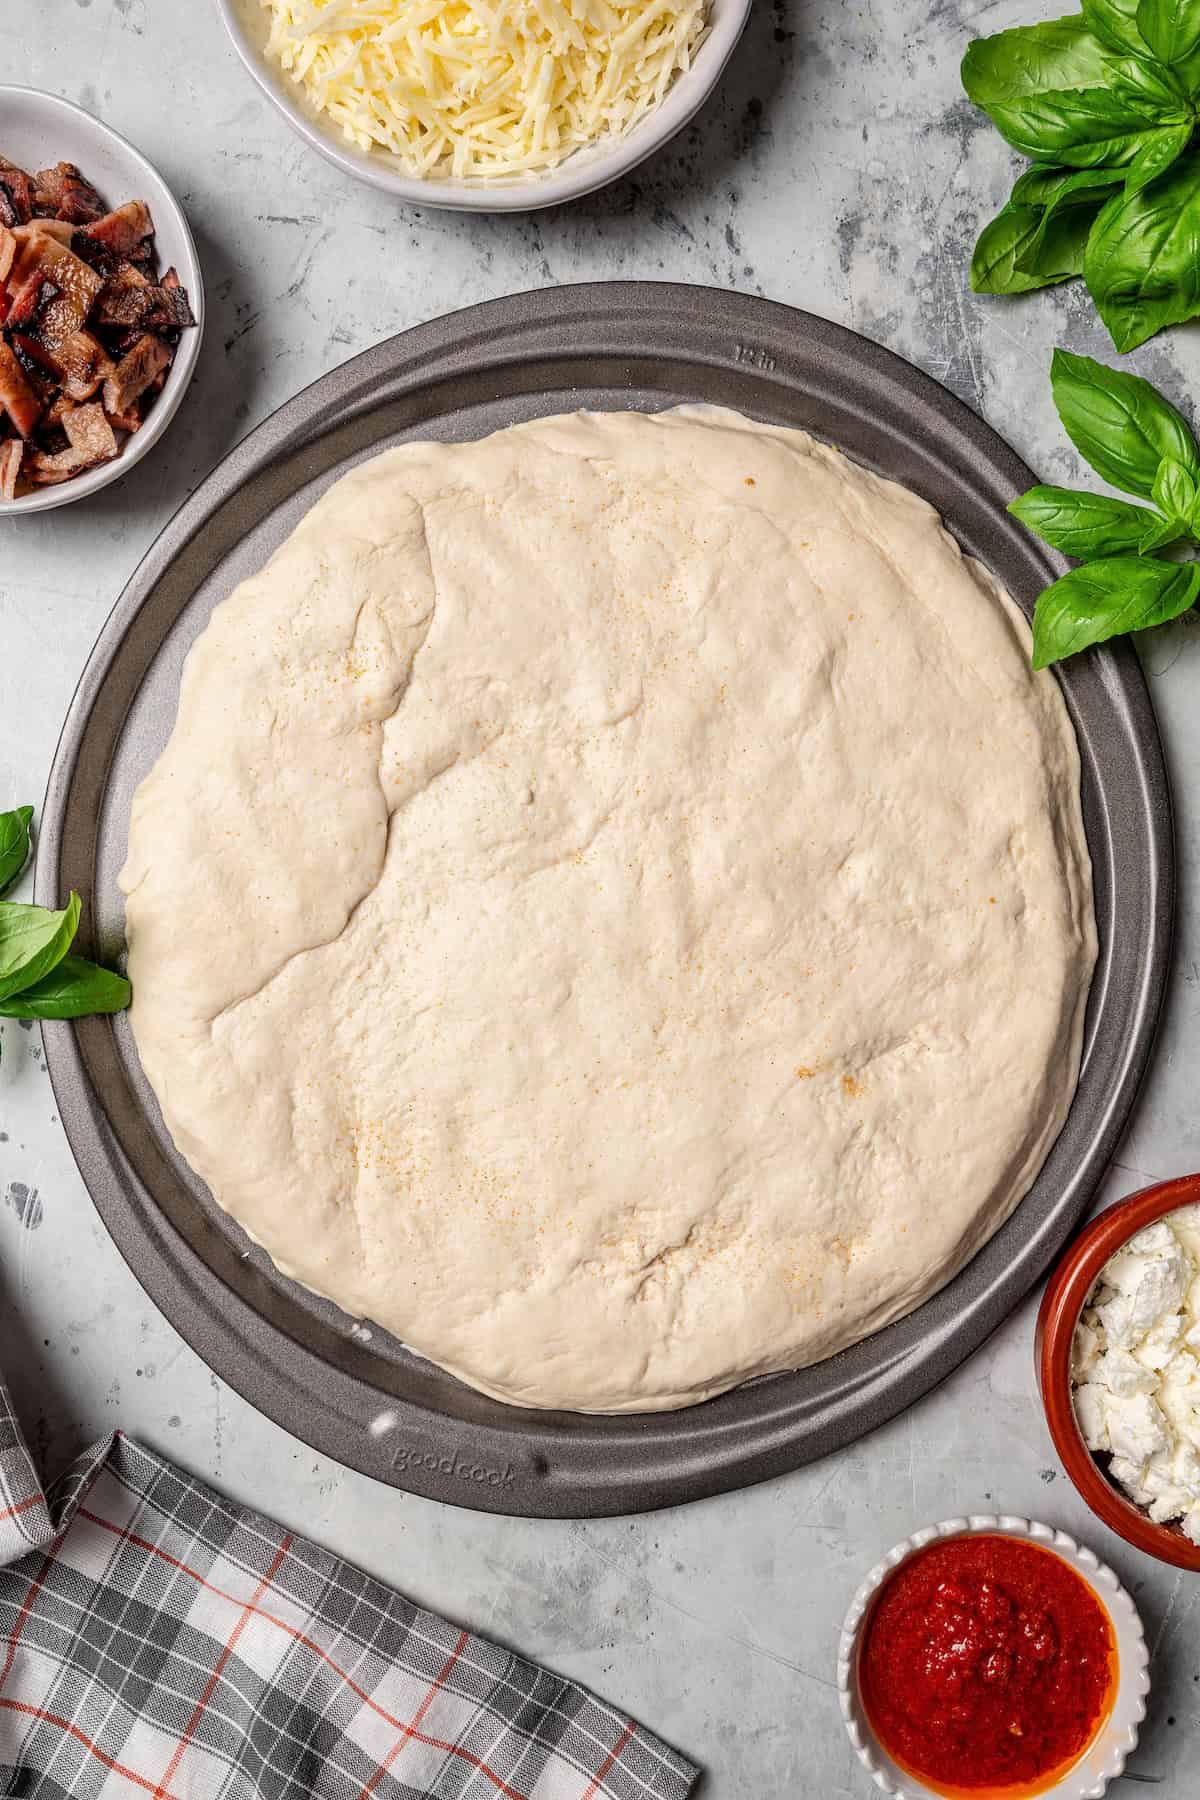 Pizza dough pressed out into a round crust inside a pizza pan.